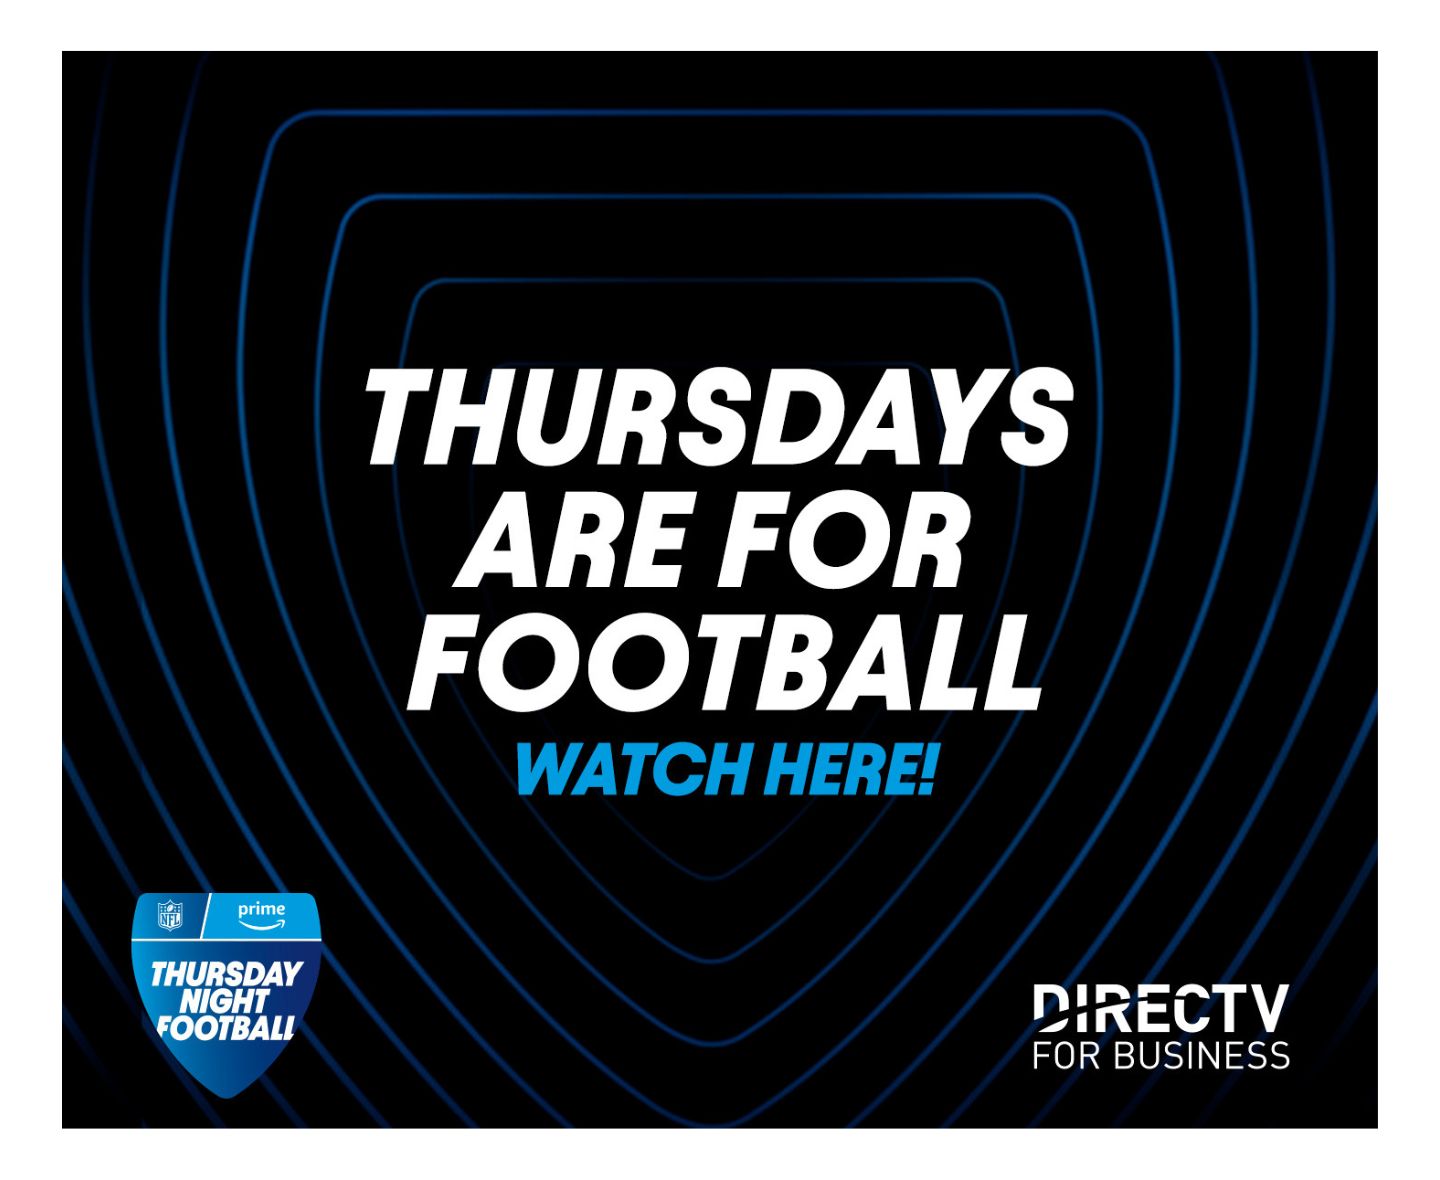 Thursday night football, where to watch thursday football, football bars, bars with nfl, bars to watch nfl, beer deals, bars with cheap beer